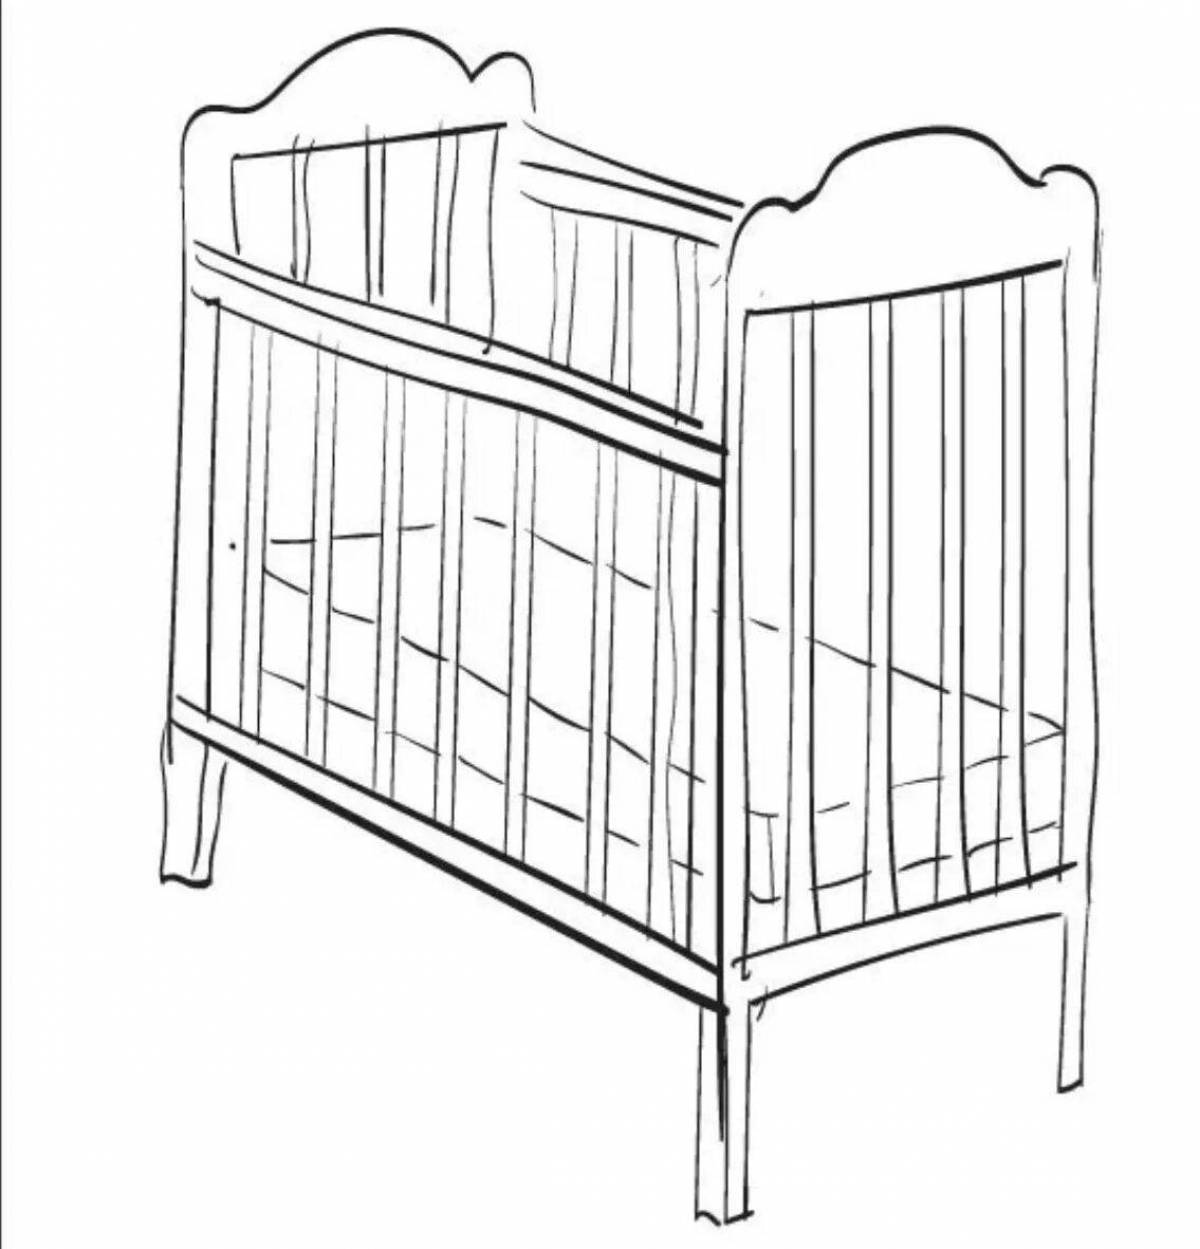 Coloring page of glowing baby bed